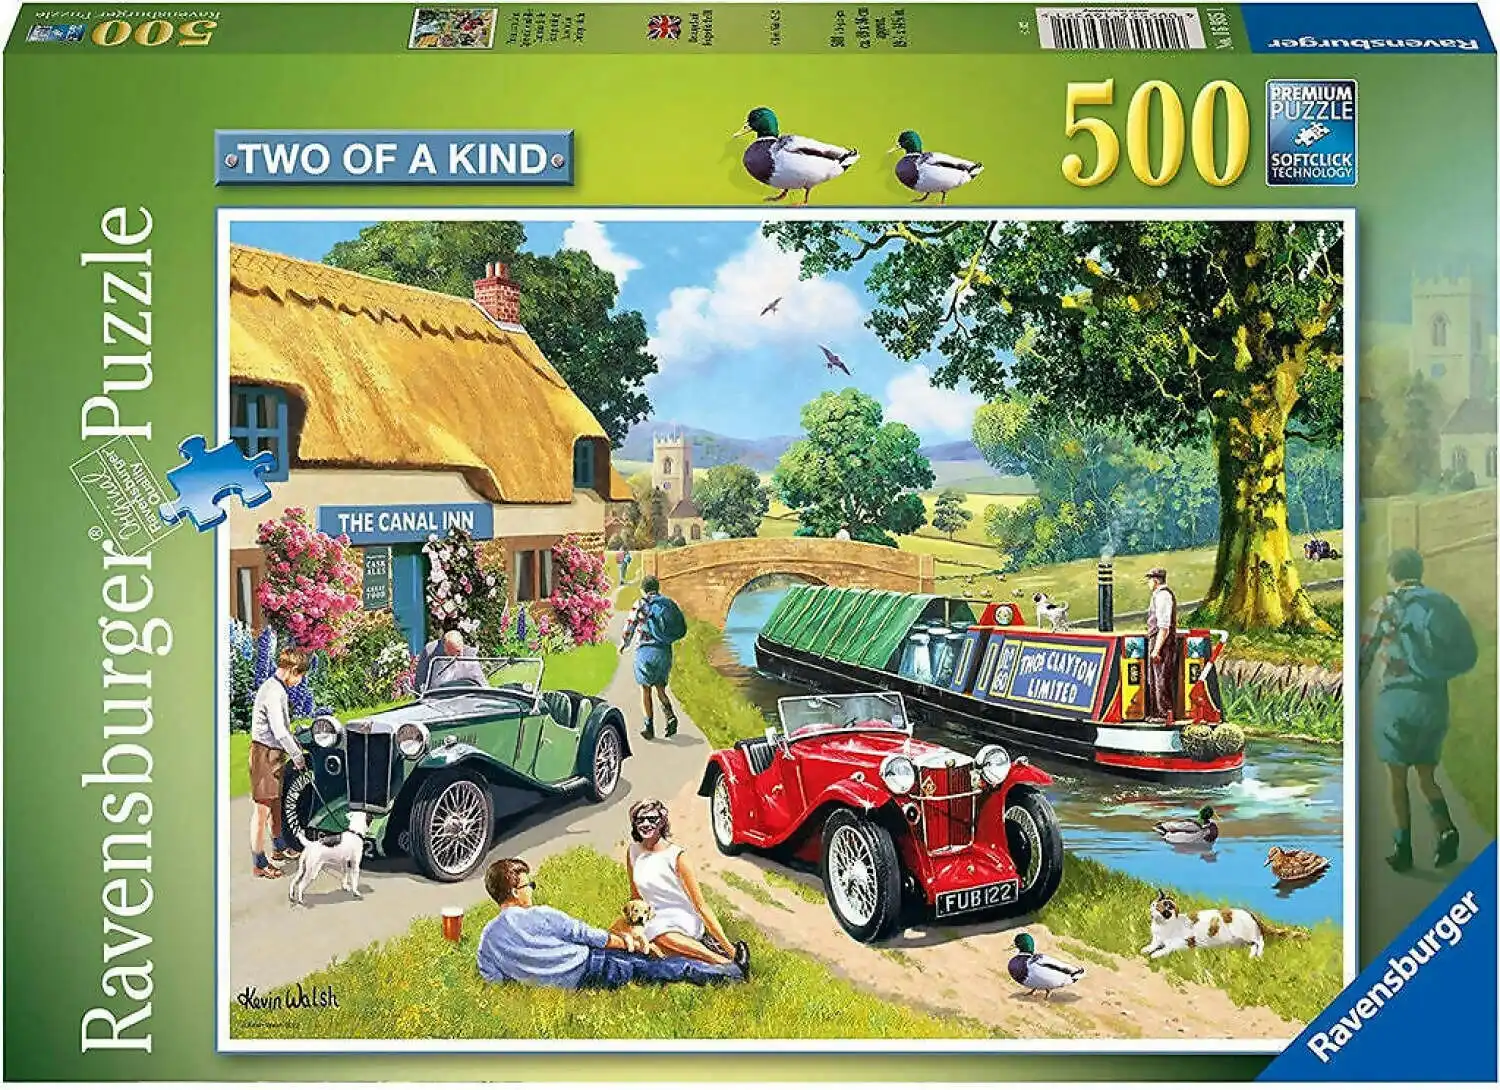 Ravensburger - Two Of A Kind Jigsaw Puzzle 500 Pieces